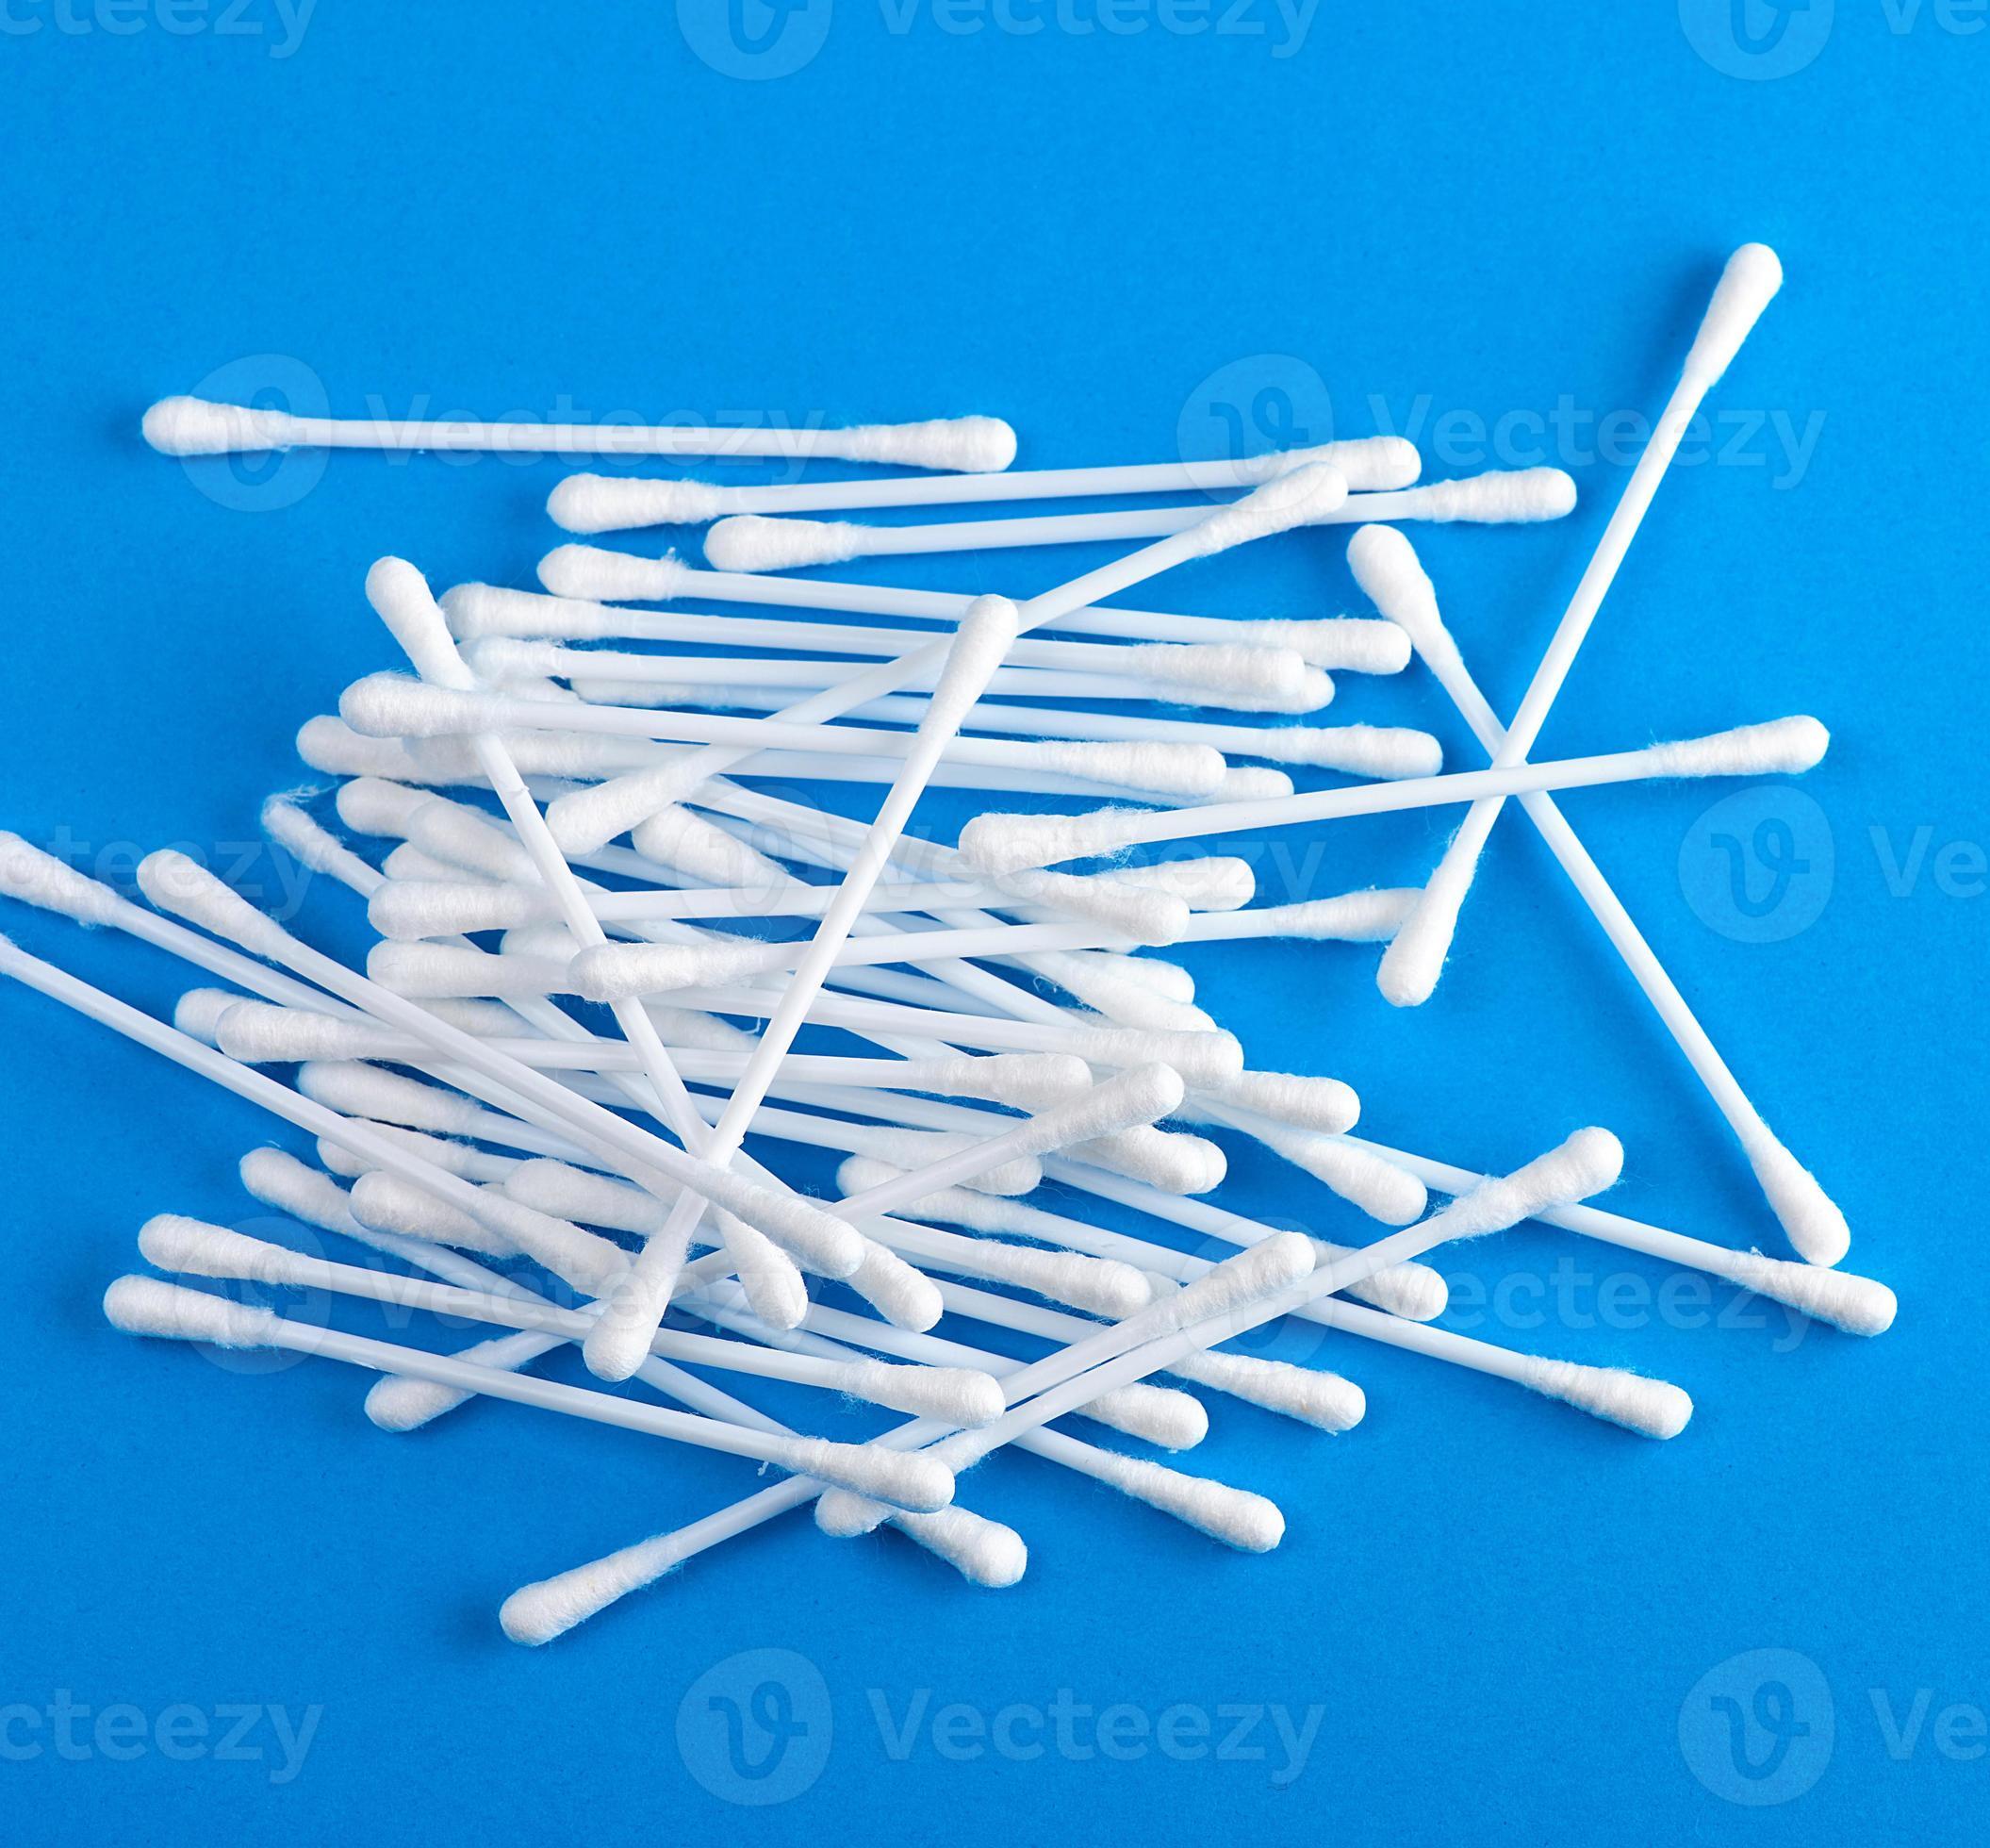 plastic sticks with white cotton for ear cleaning and other